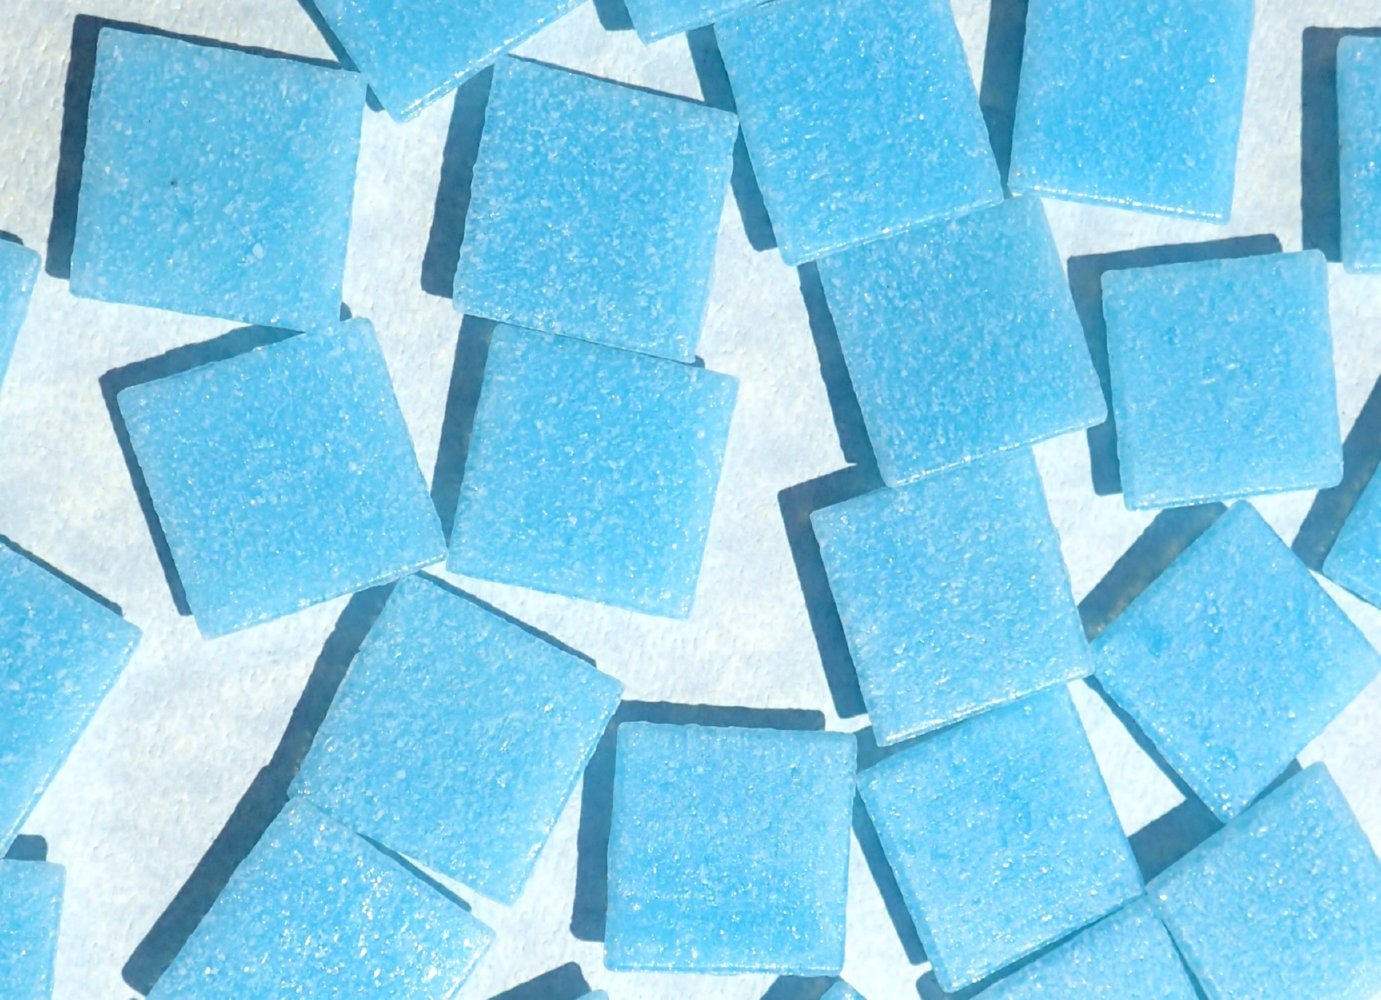 Light Blue Glass Mosaic Tiles Squares - 20mm - Half Pound of Sky Blue Vitreous Glass Tiles for Craft Projects - Approx 75 Tiles